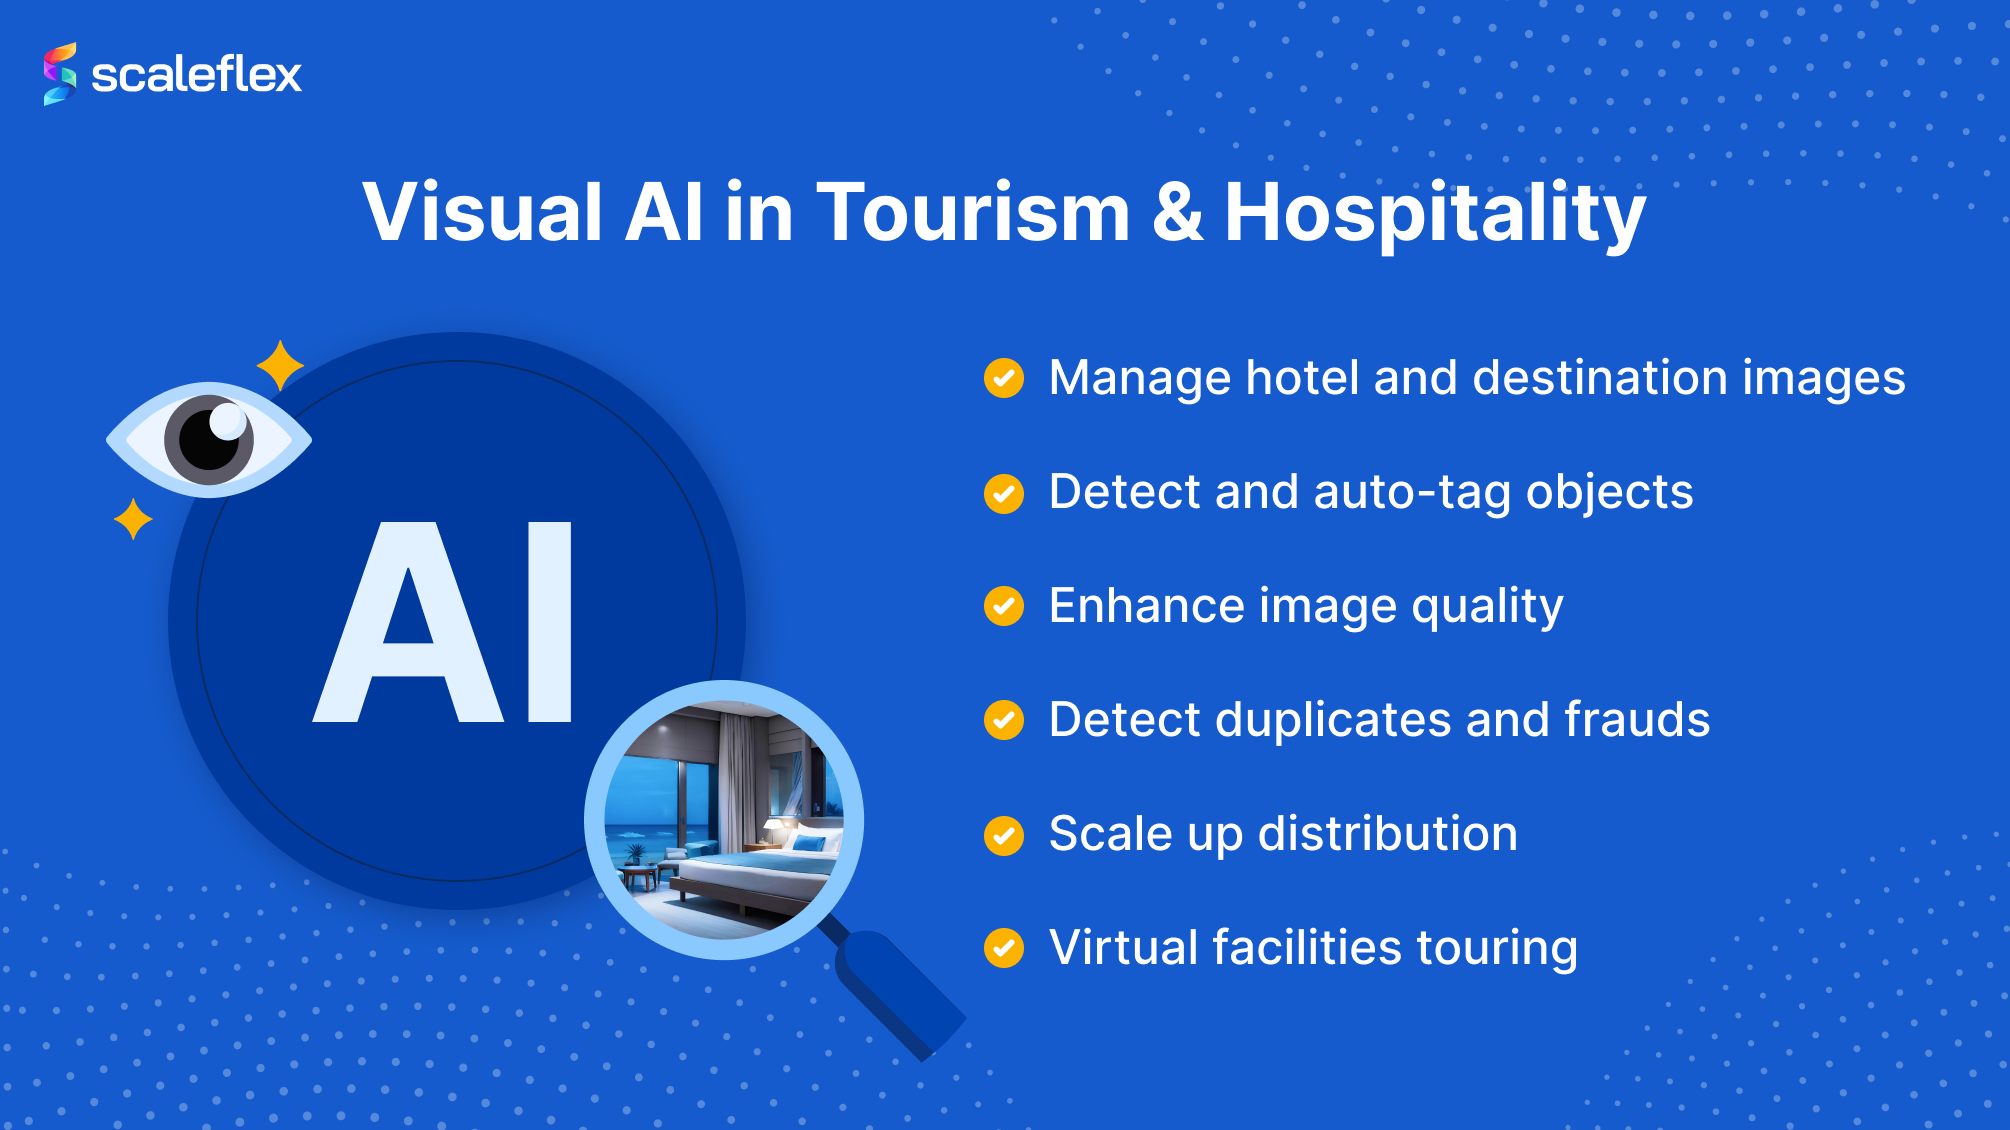 A short index card with the benefits of Visual AI in the travel industry